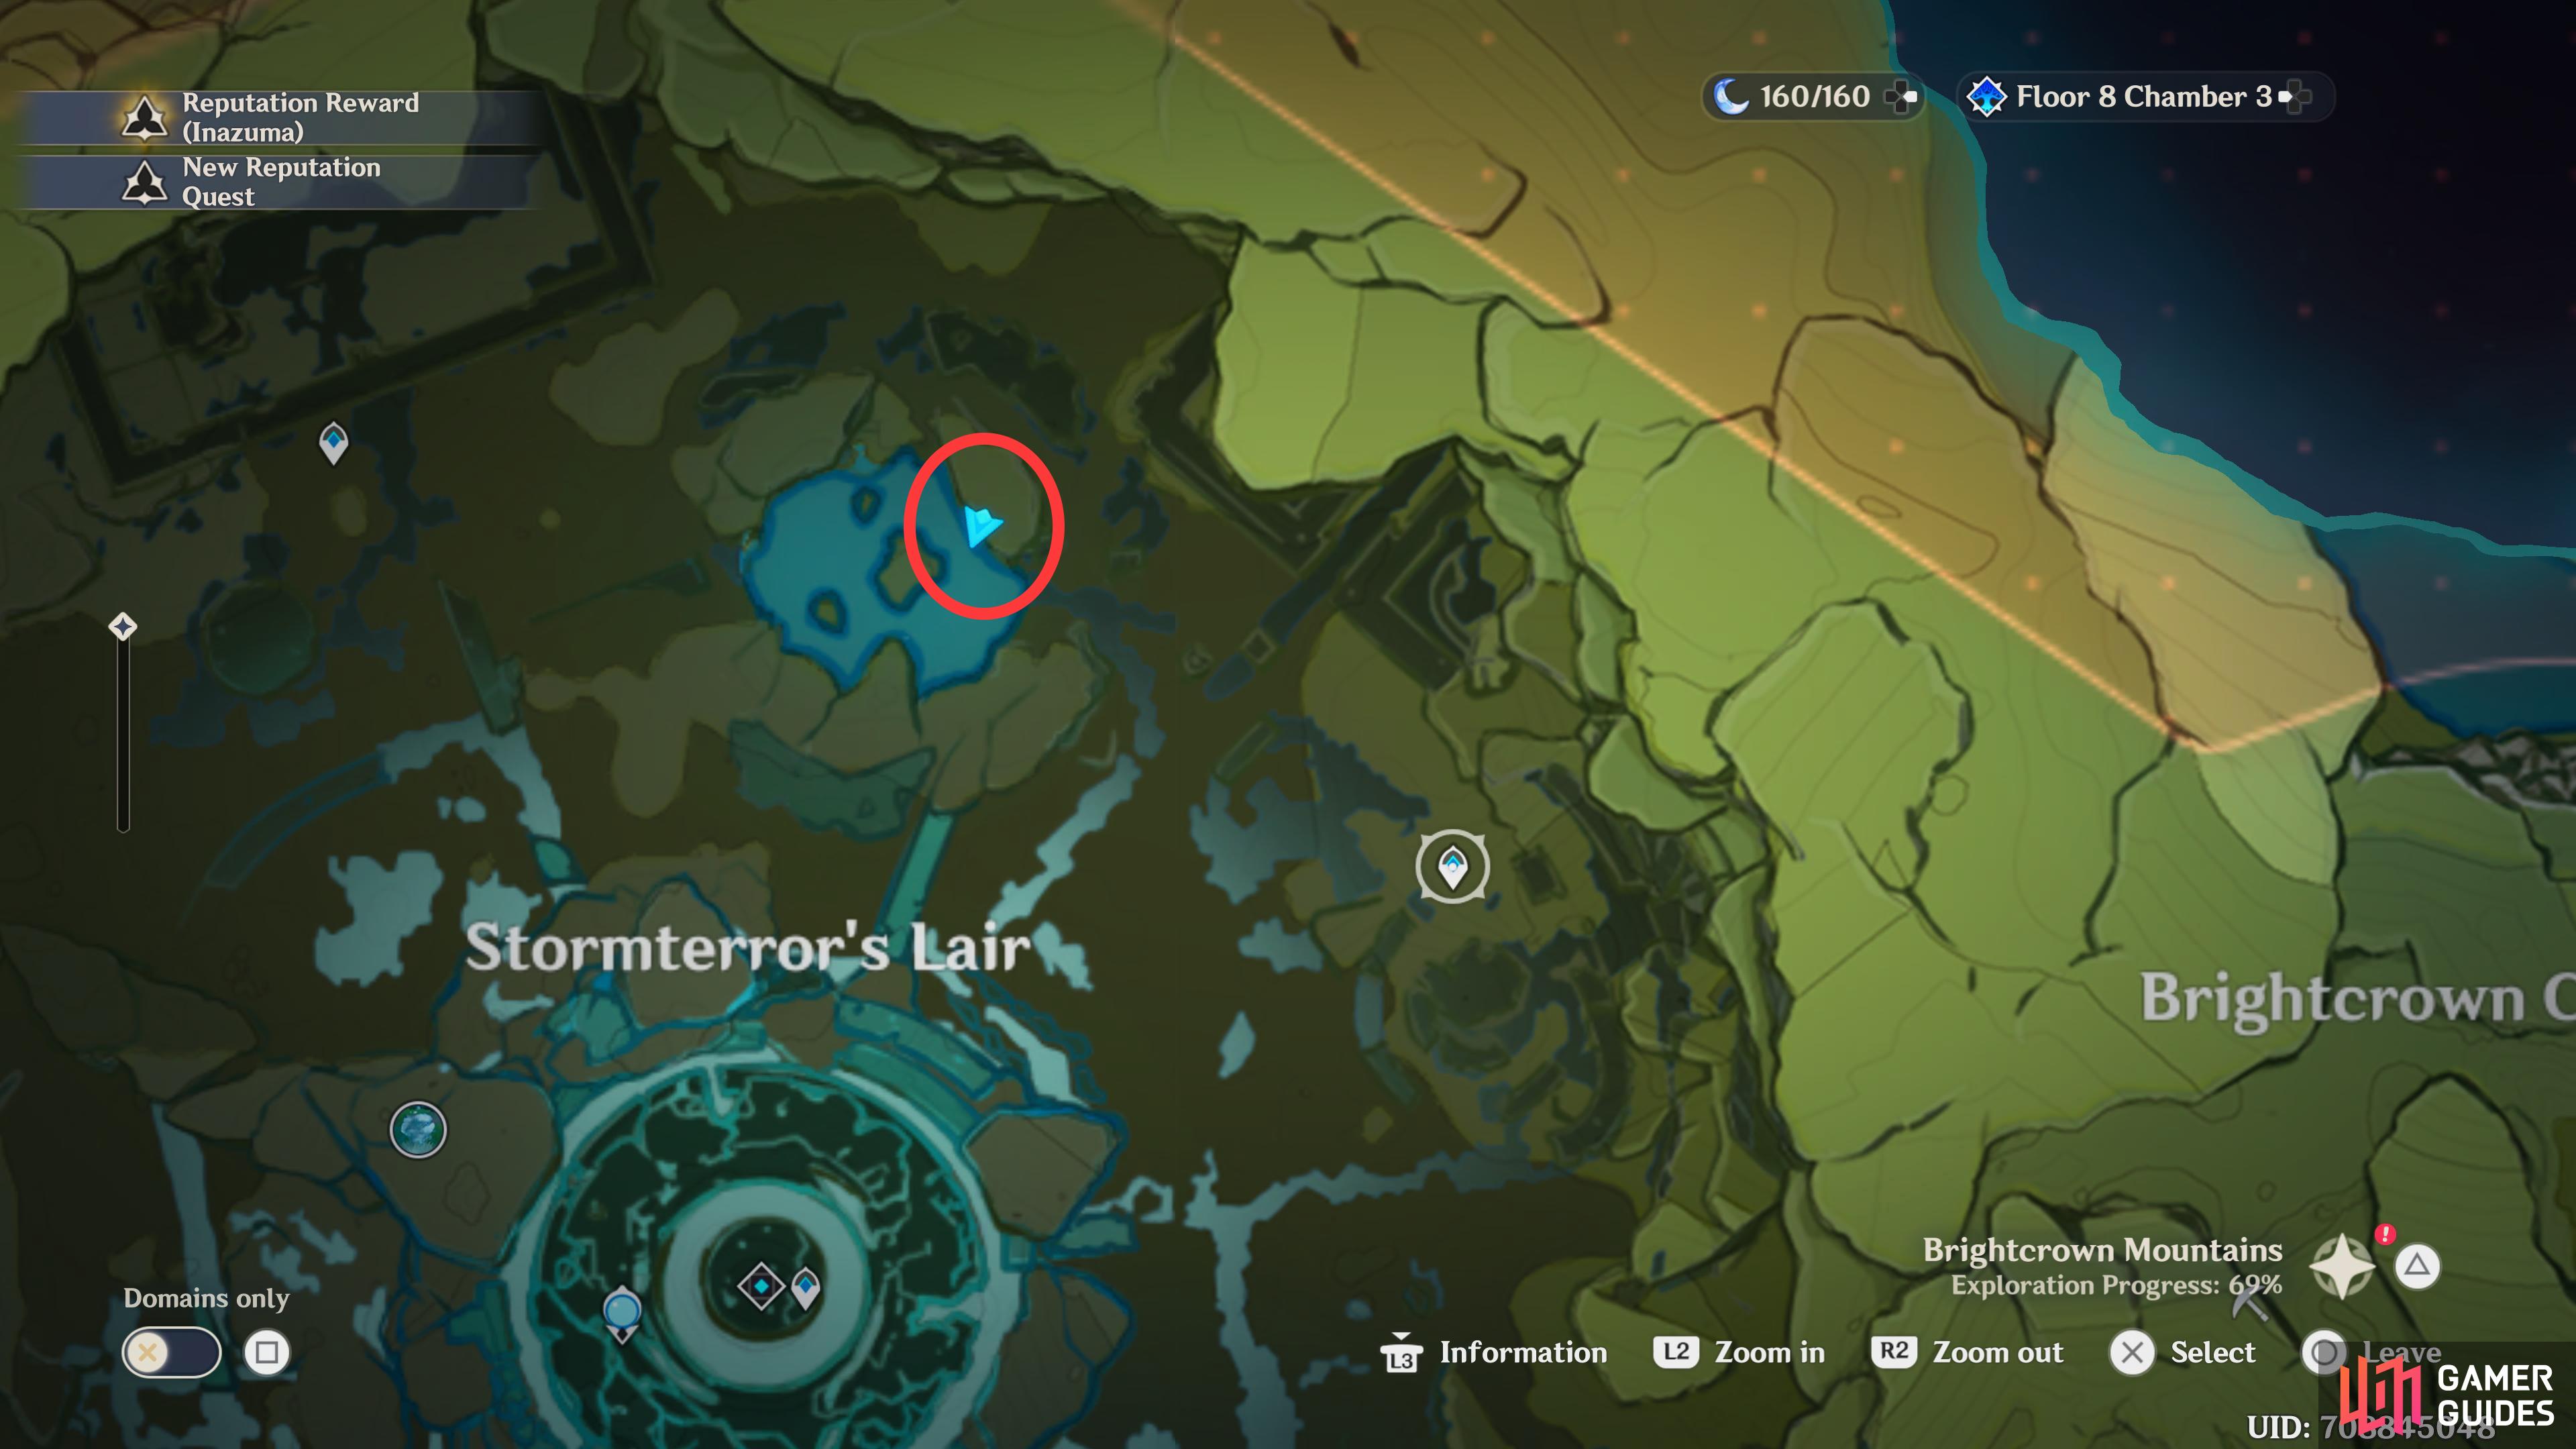 The Northeast Stormterrors Lair Fishing Point is in the lake just to the northeast of the Statue of the Seven.